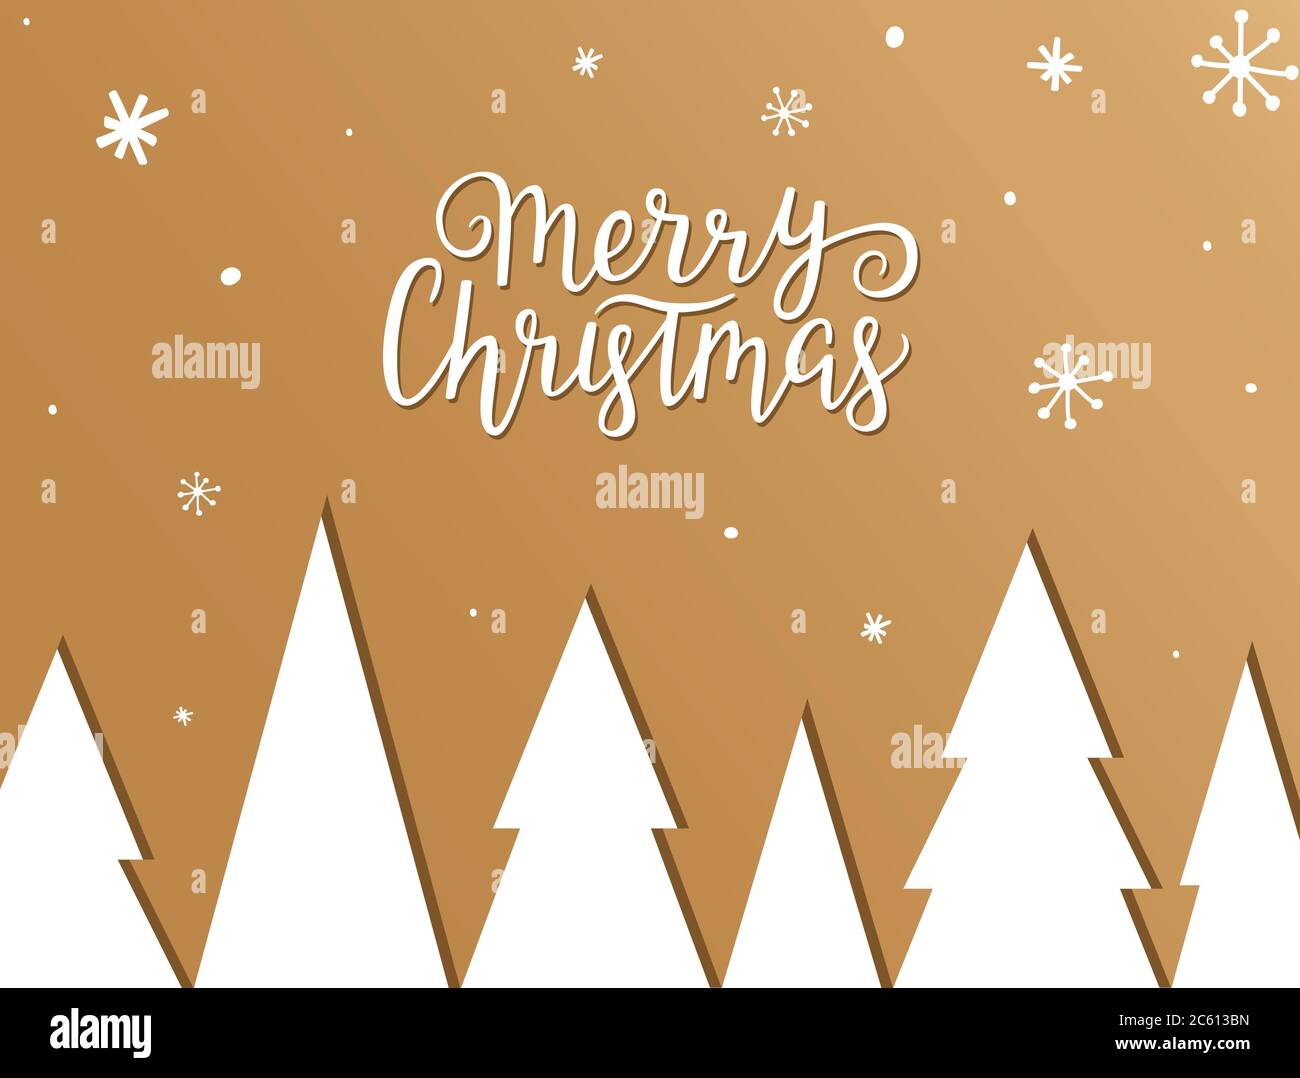 Christmas gold background with trees, snow, snowflakes and hand lettering. Merry Christmas hand drawn phrase. Xmas card with winter landscape. Vector Stock Vector